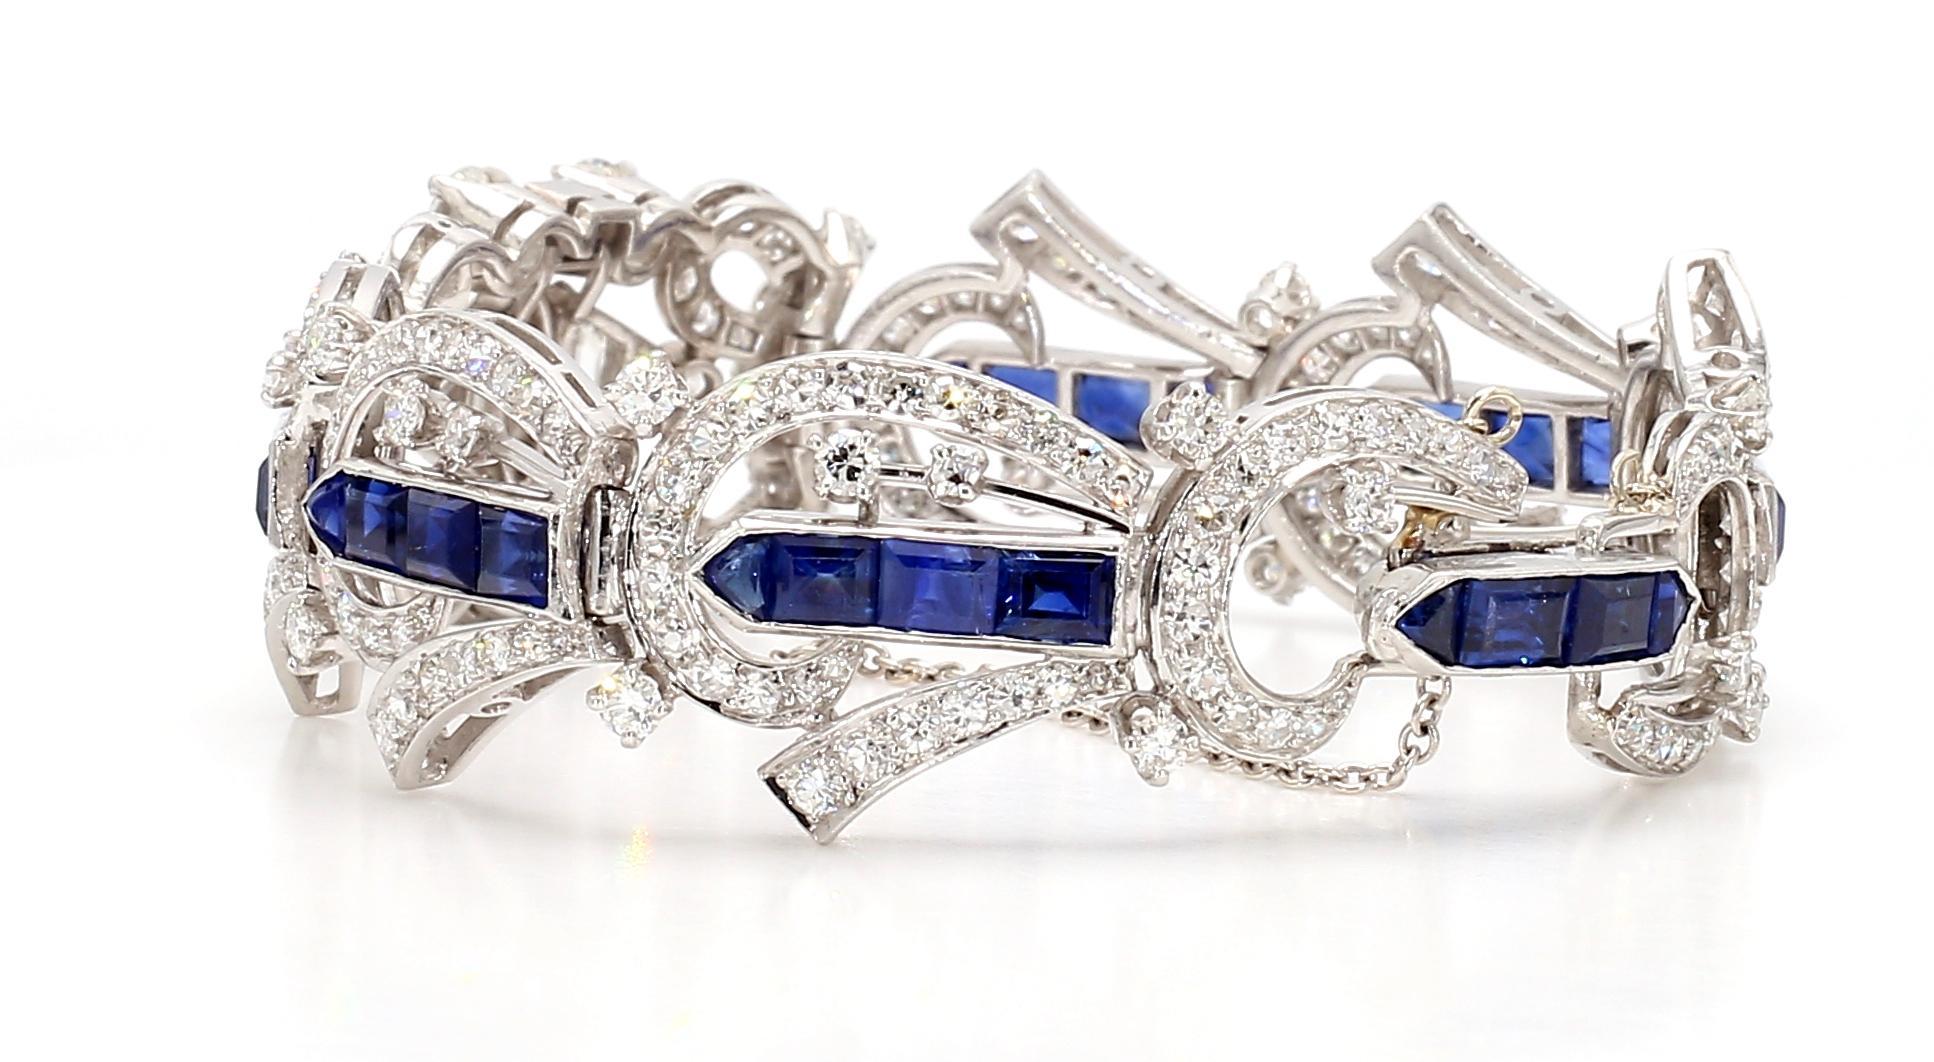 5.5 Carat Blue Sapphire and 1.5 Carat Diamond Art Deco Platinum Bracelet In Good Condition For Sale In New York, NY